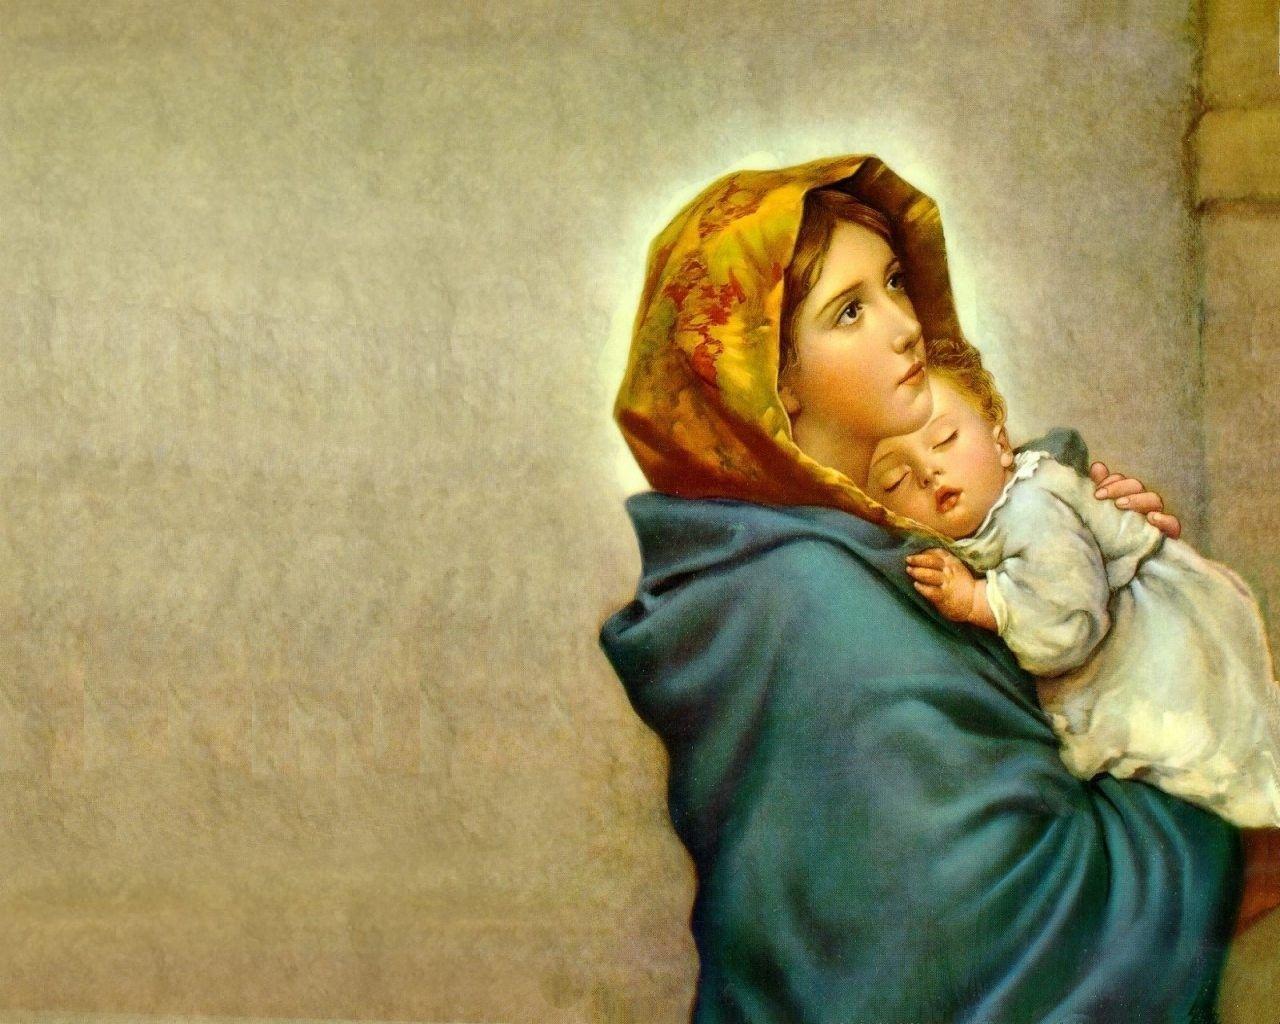 Details about BLESSED VIRGIN MARY GLOSSY POSTER PICTURE